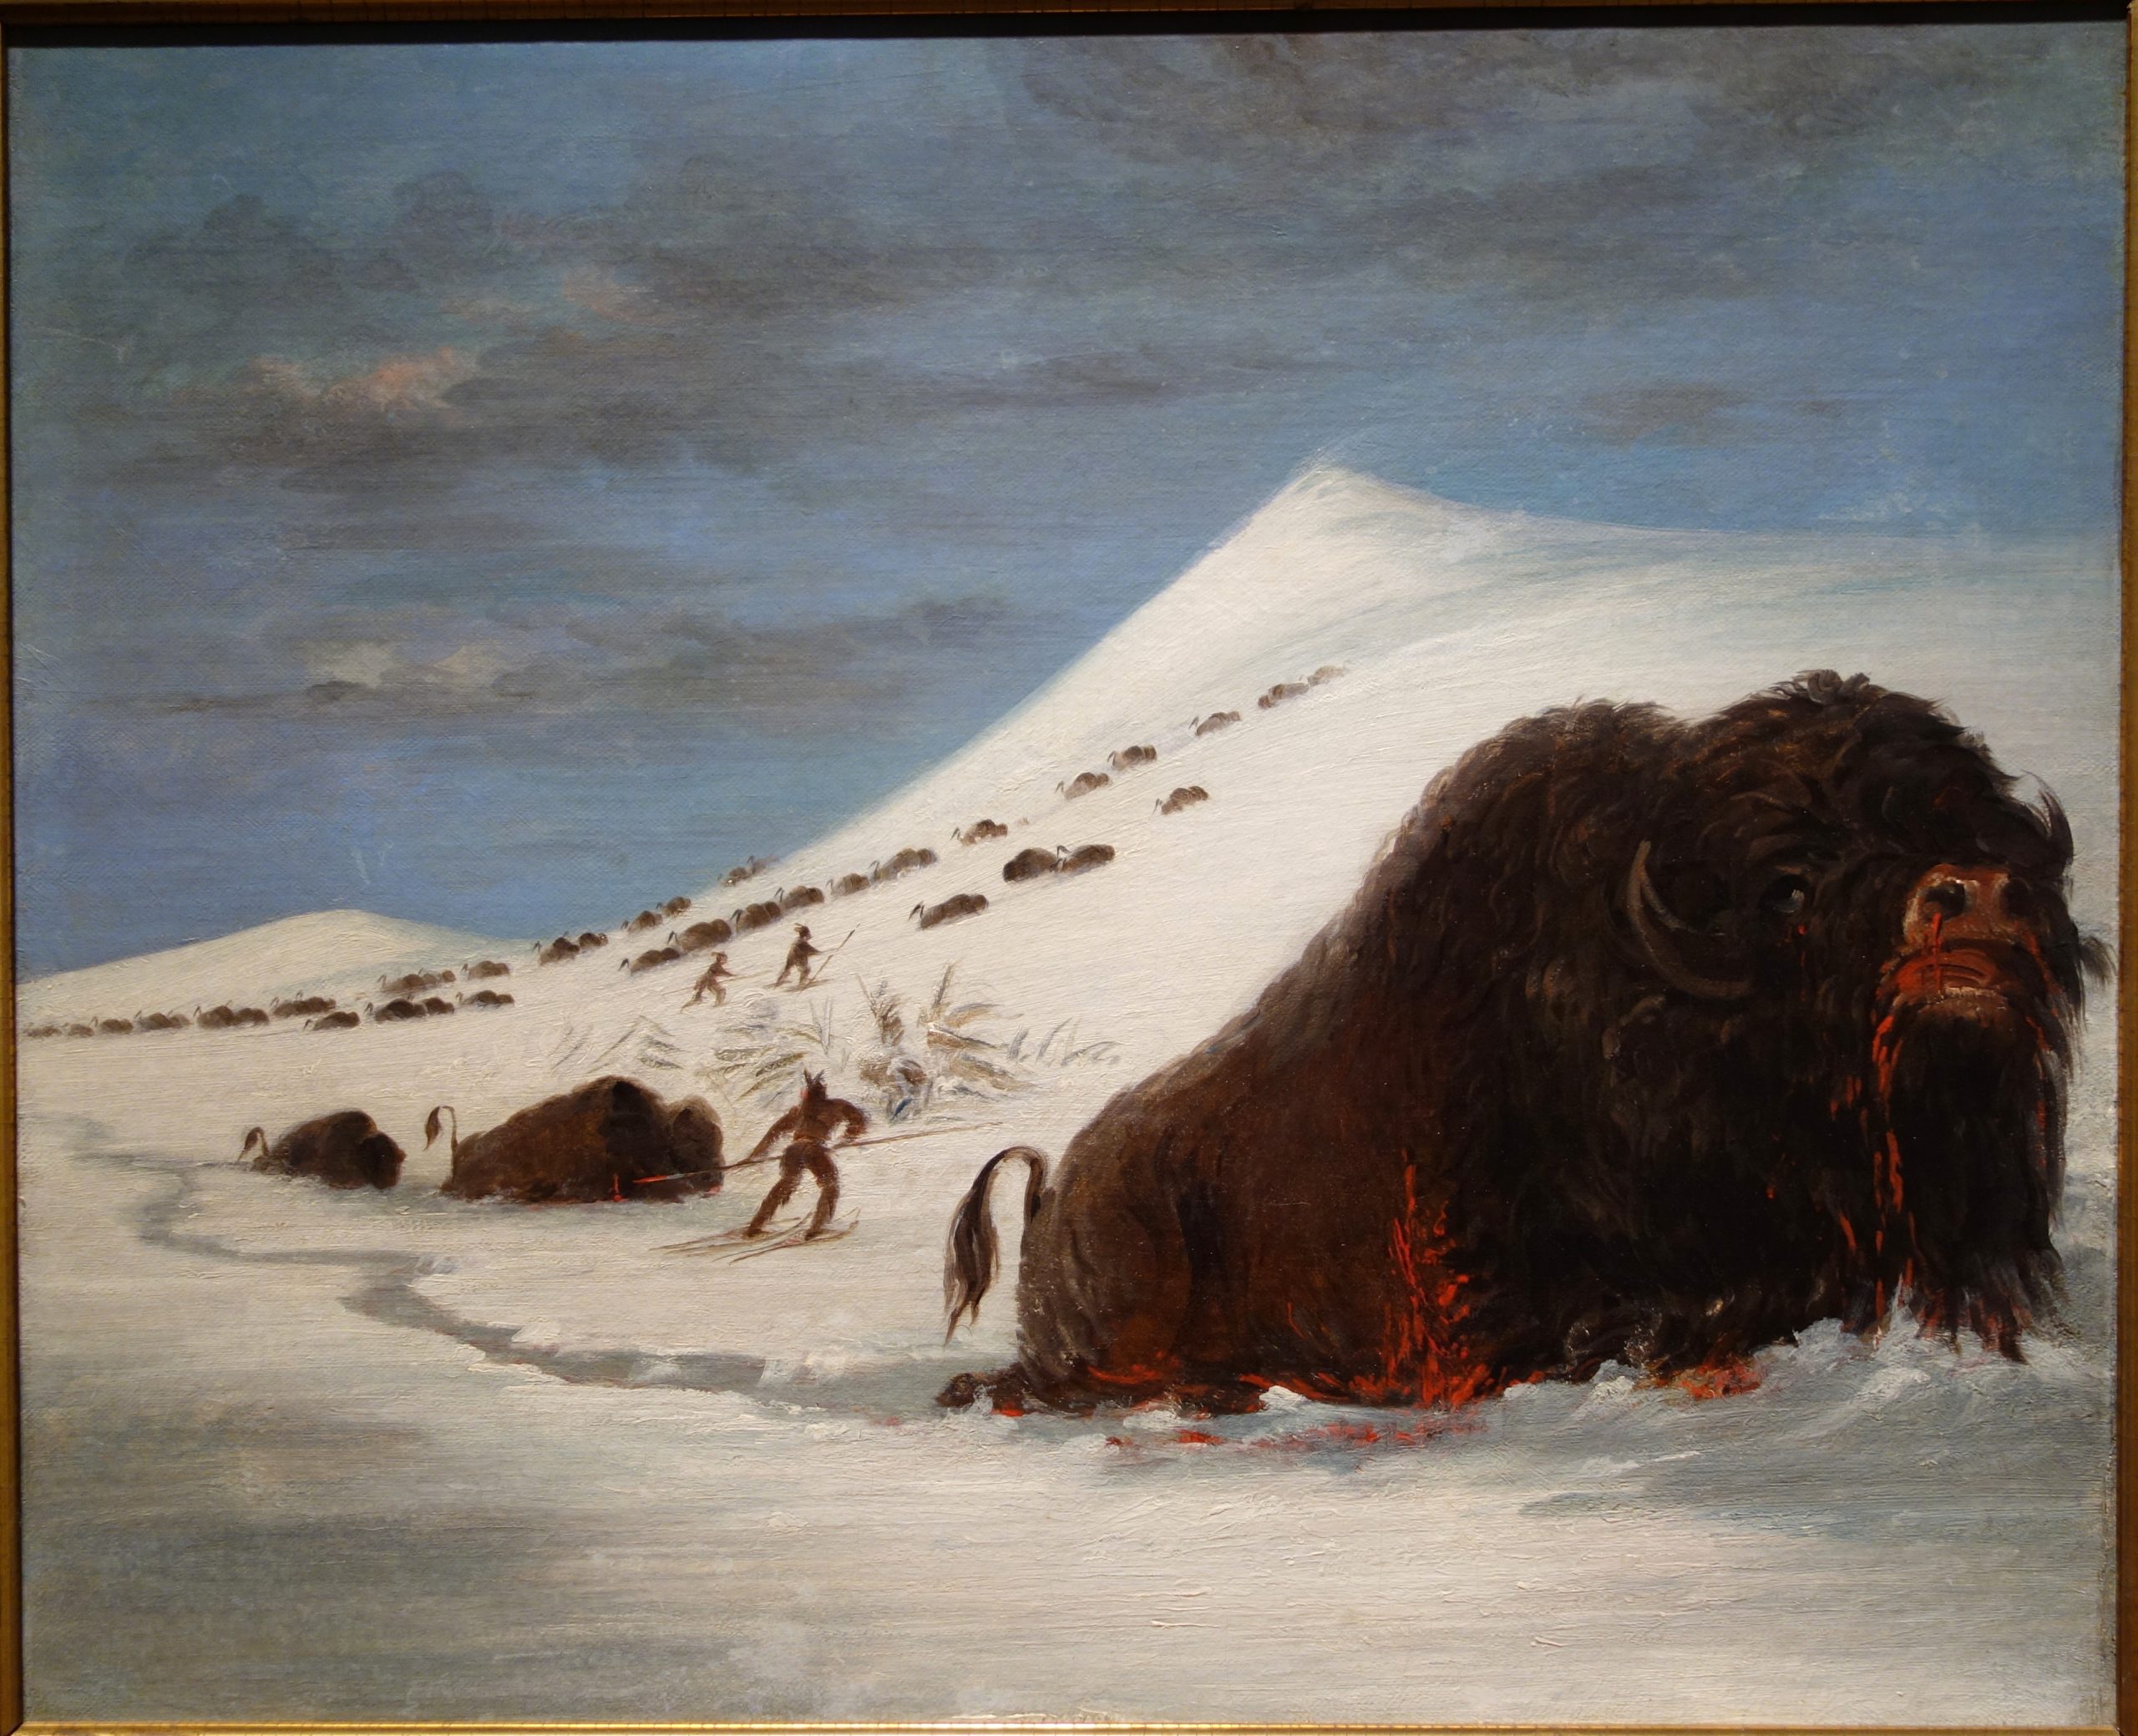 A large buffalo travels through heavy snow with people working in the distance.